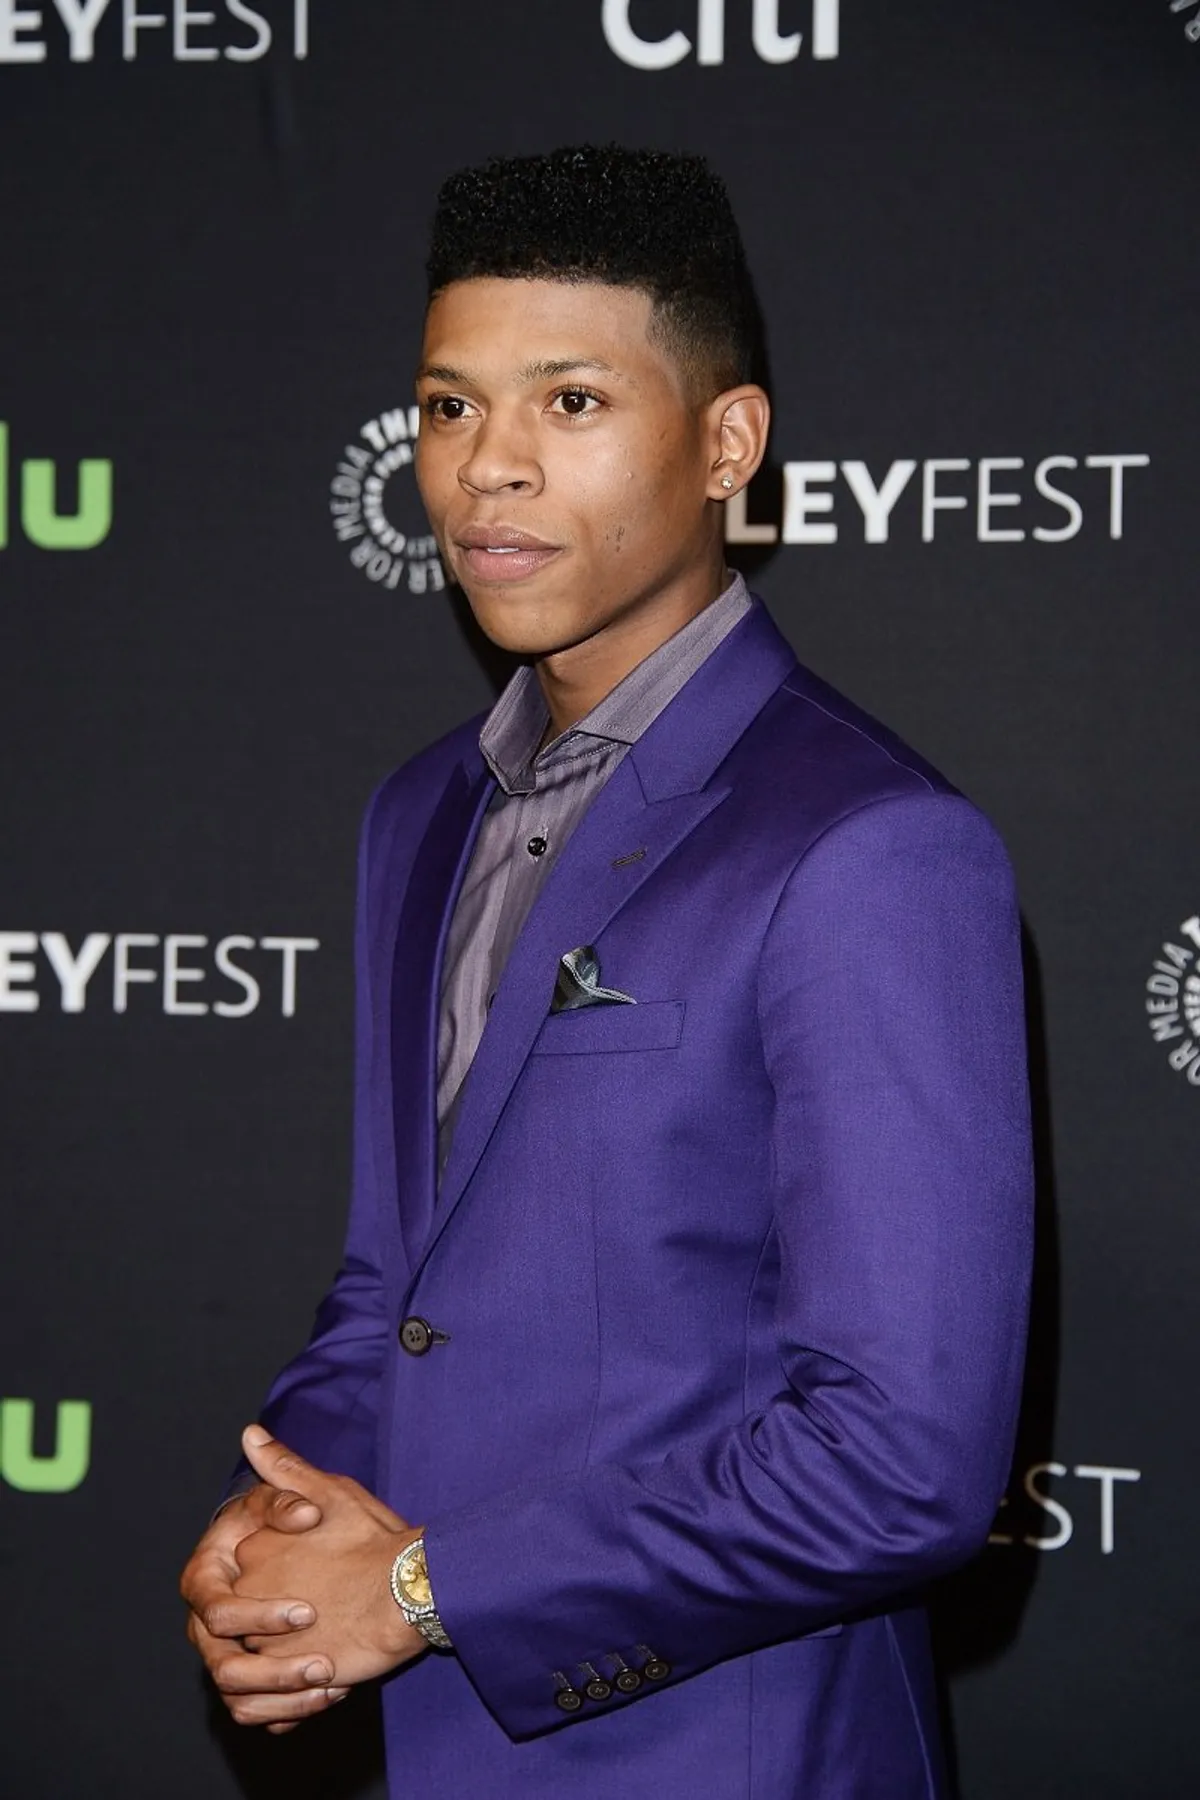 Bryshere 'Yazz' Gray on March 11, 2016 in Hollywood, California | Photo: Getty Images